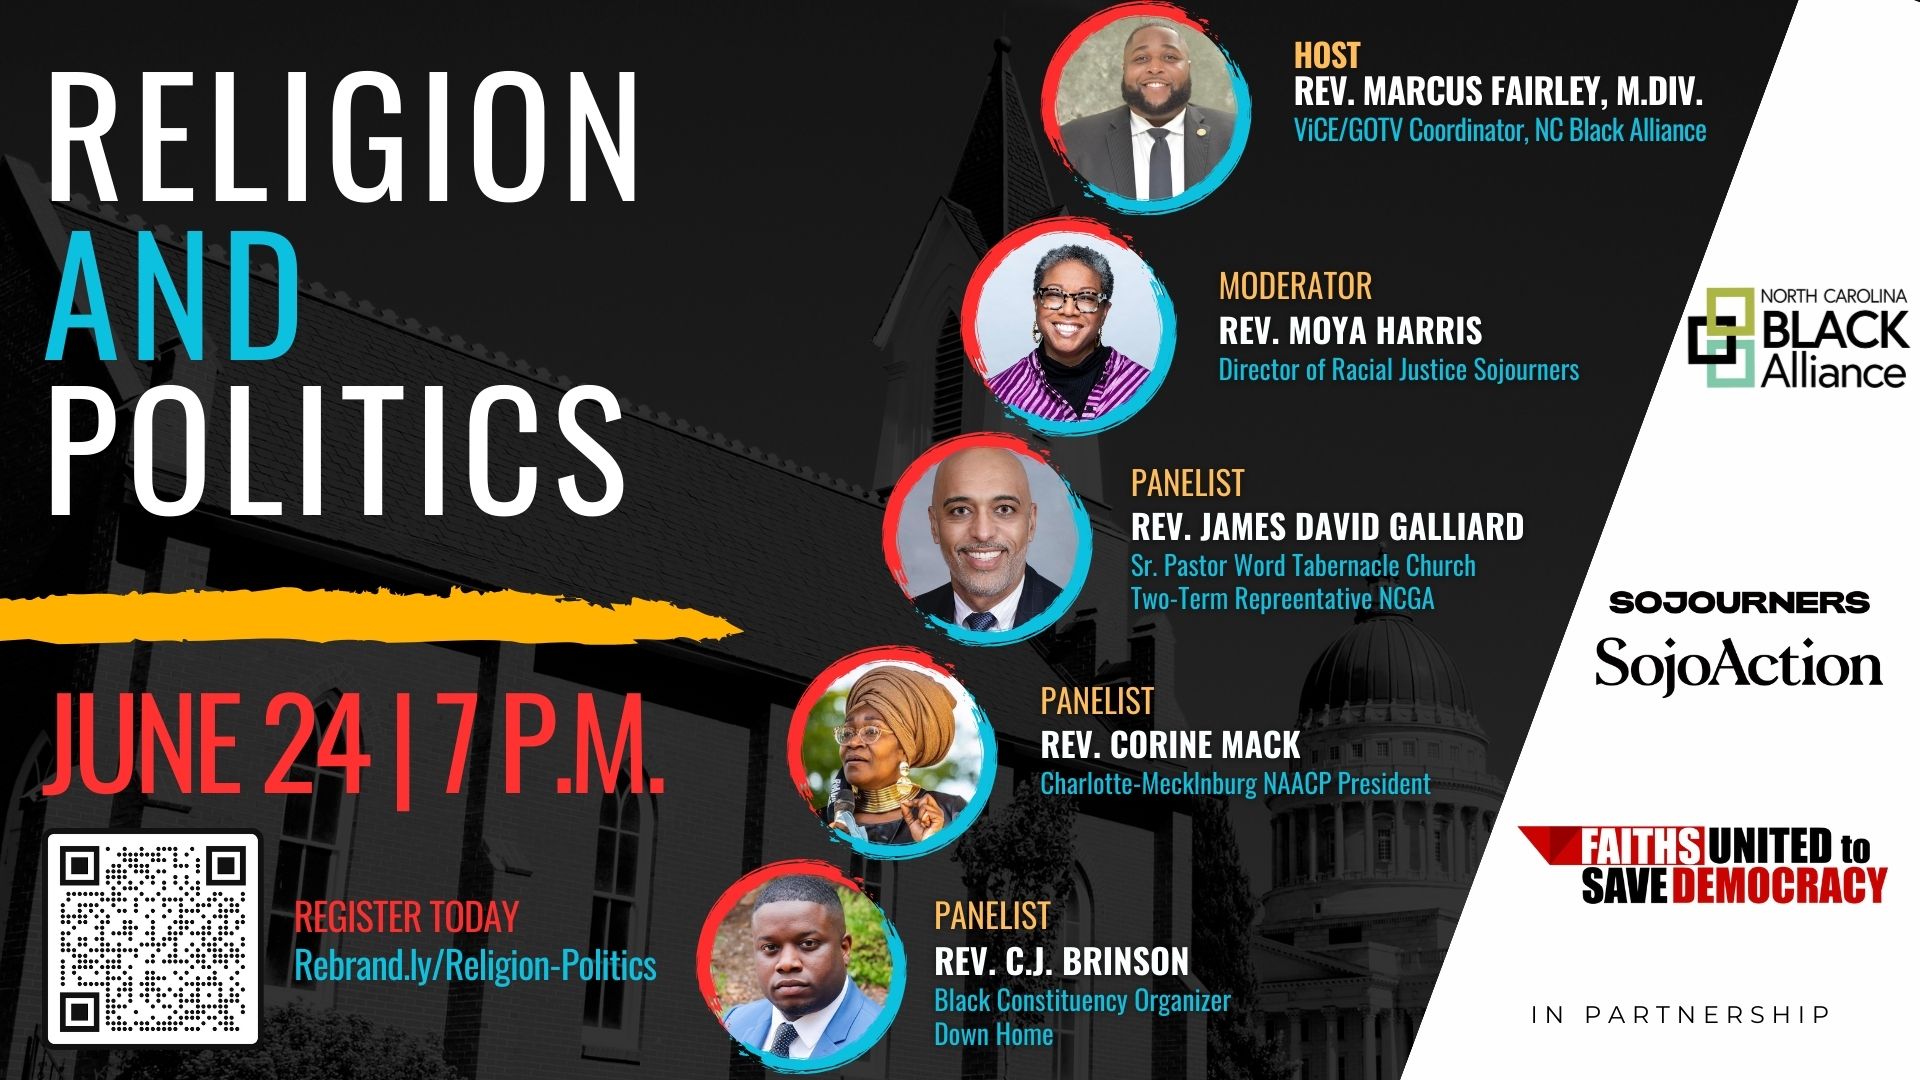 Virtual Religion and Politics on June 24 at 7 pm